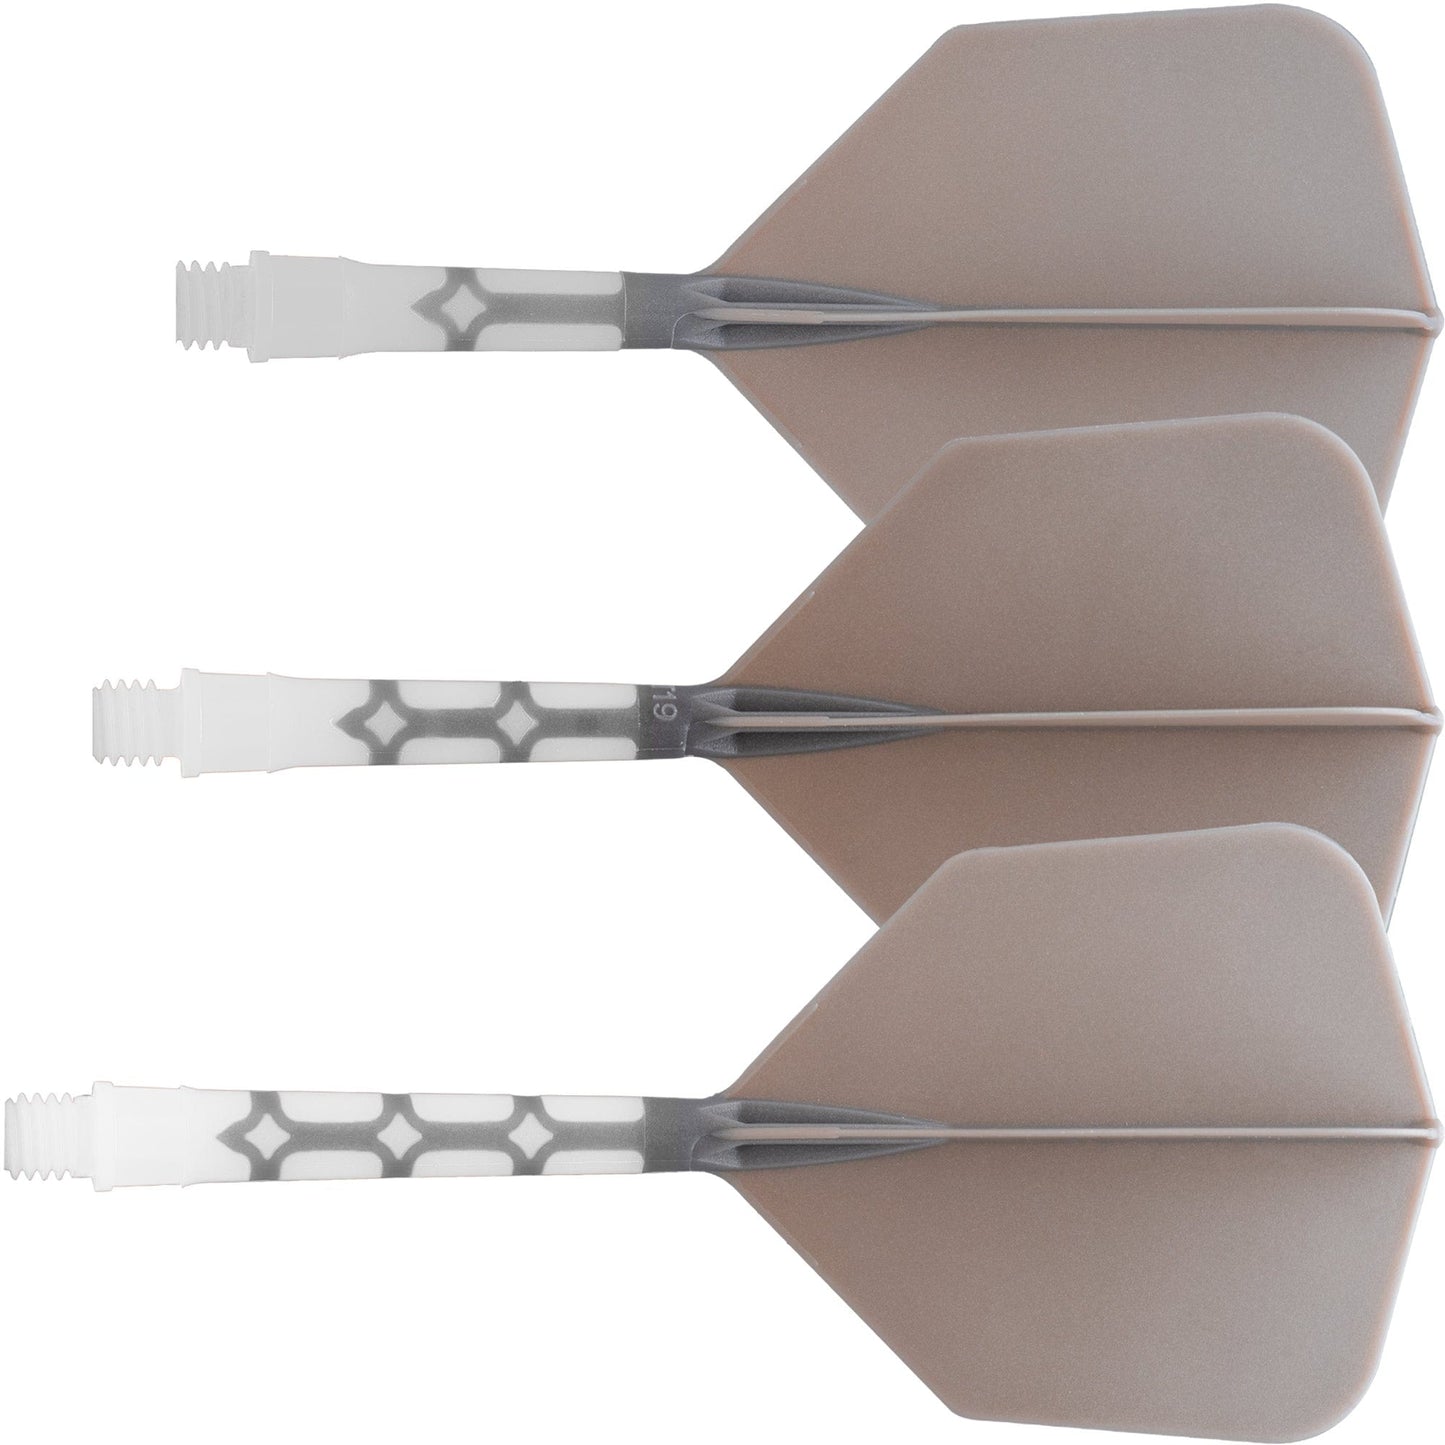 Cuesoul Rost T19 Integrated Dart Shaft and Flights - Big Wing - White with Grey Flight